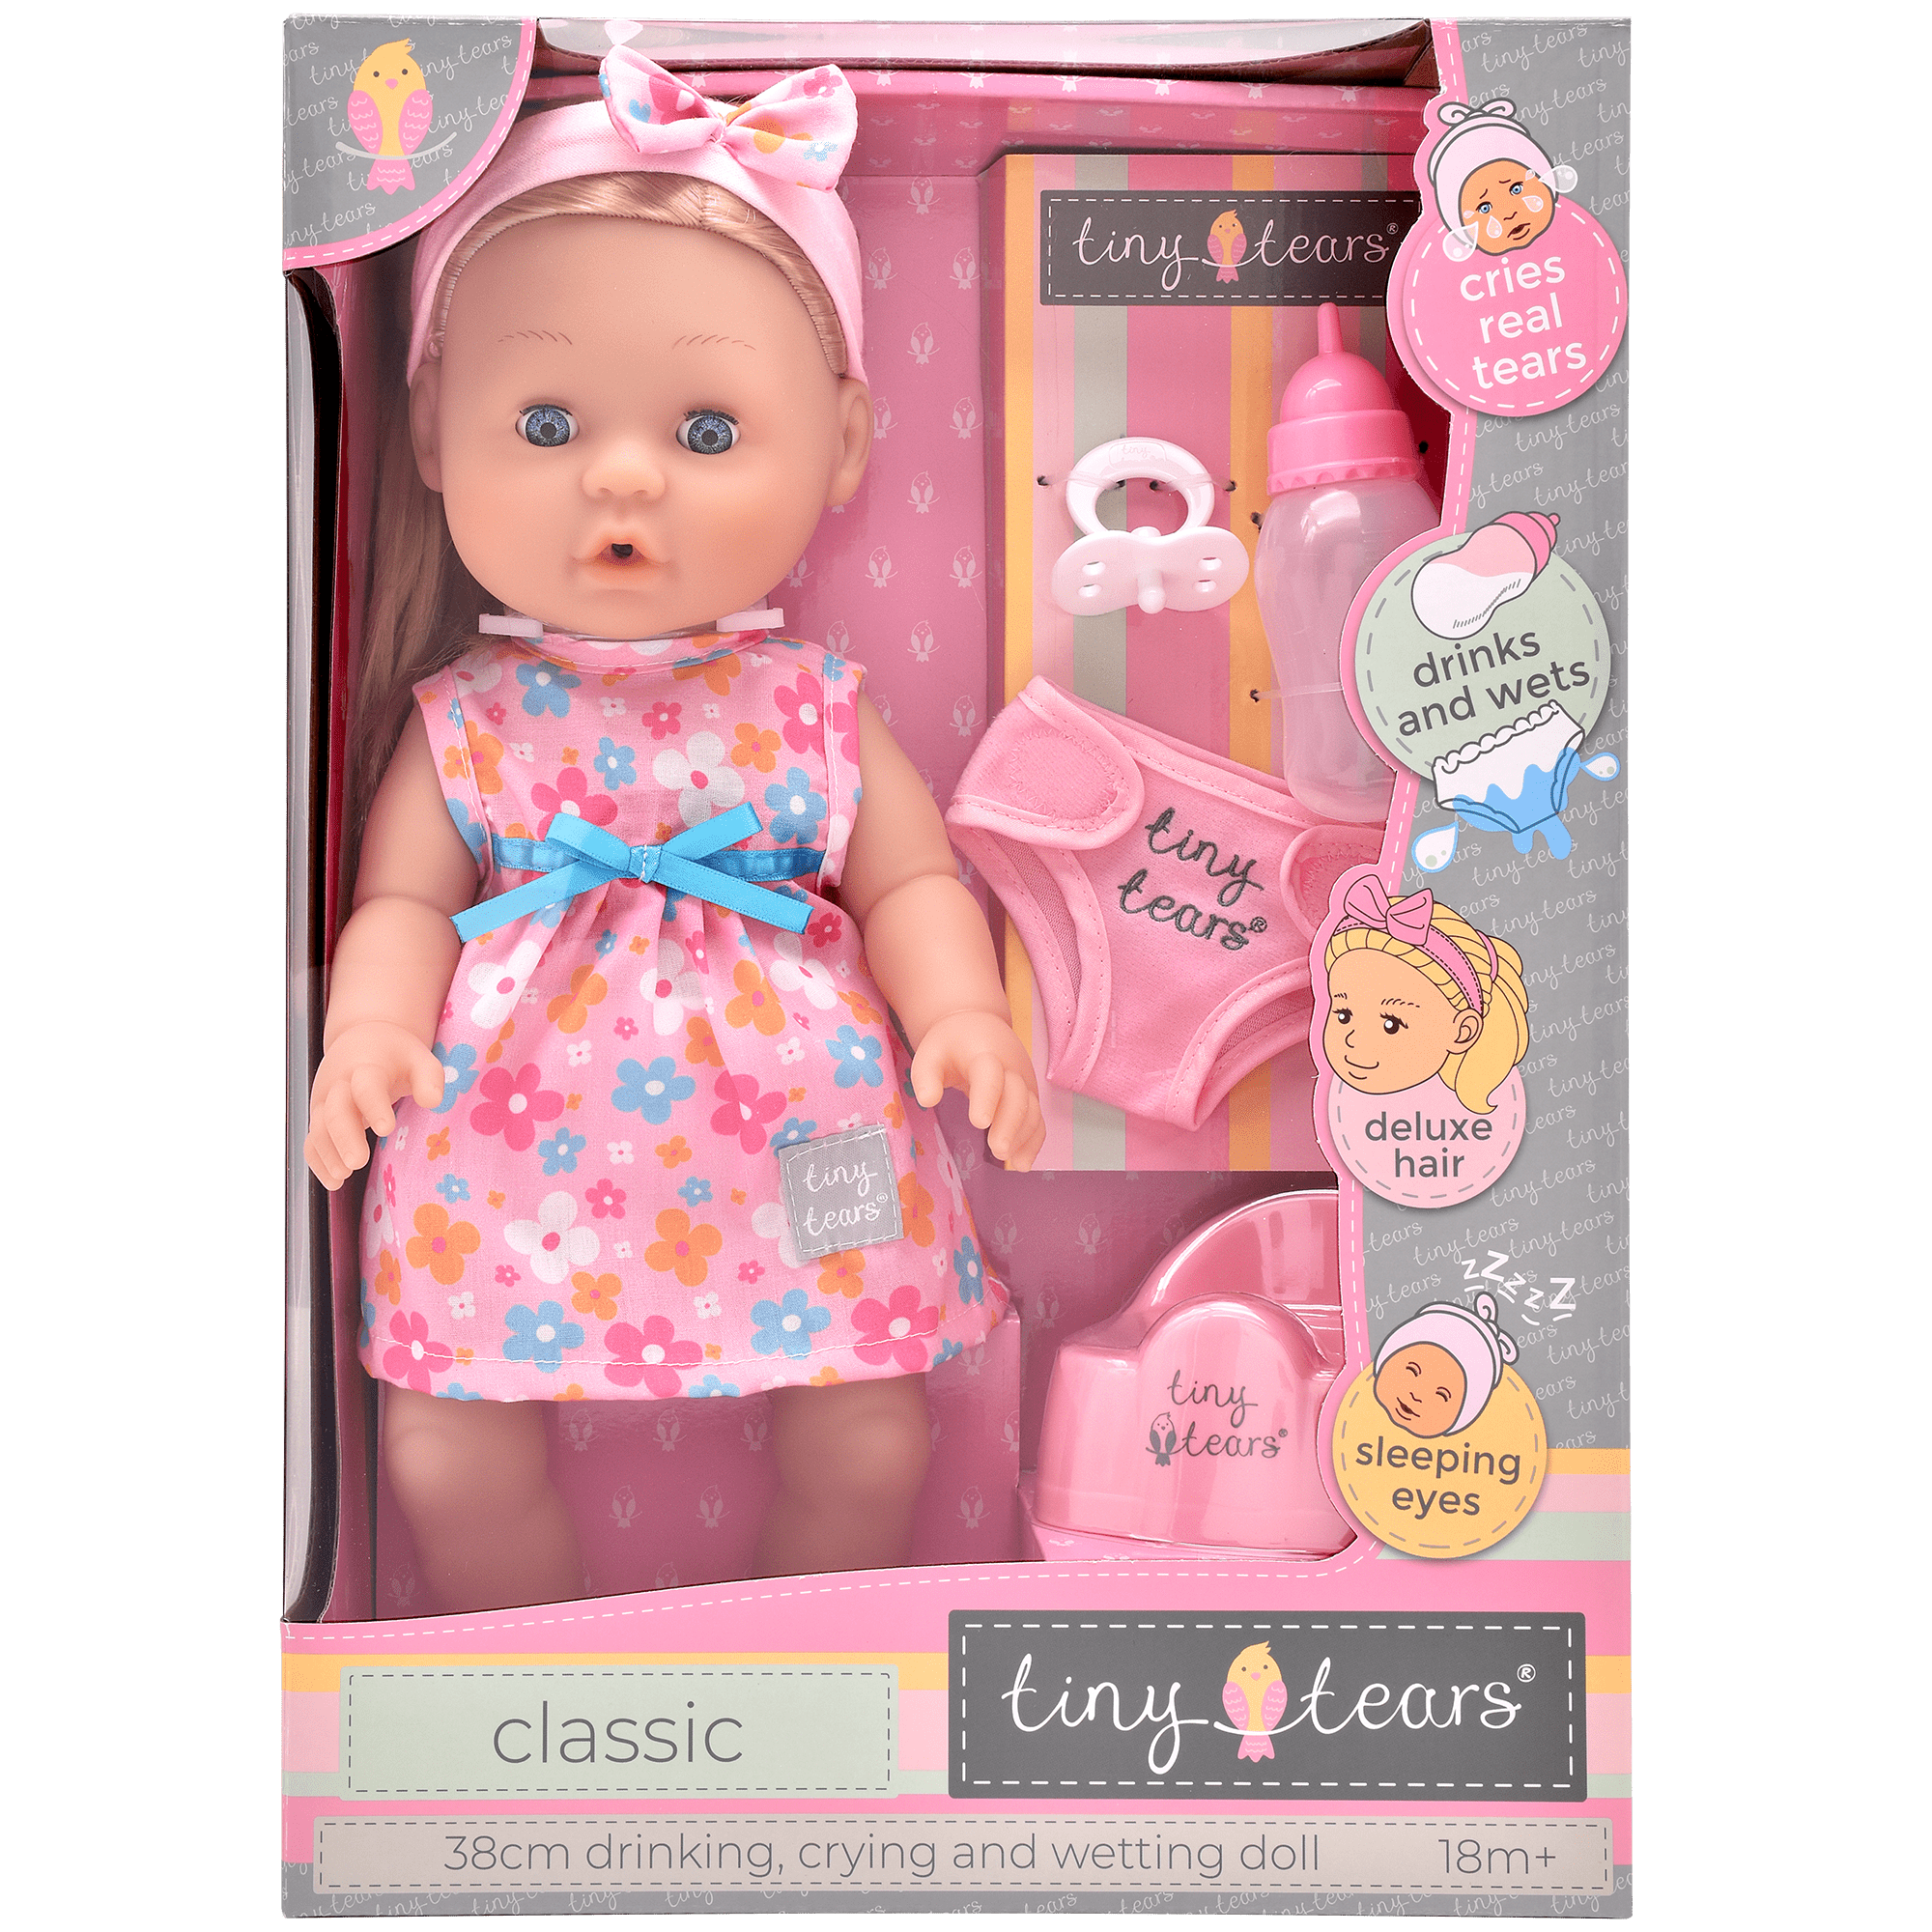 NEW CLASSIC TINY TEARS BABY DOLL Drinking Crying & Wetting by John Adams 